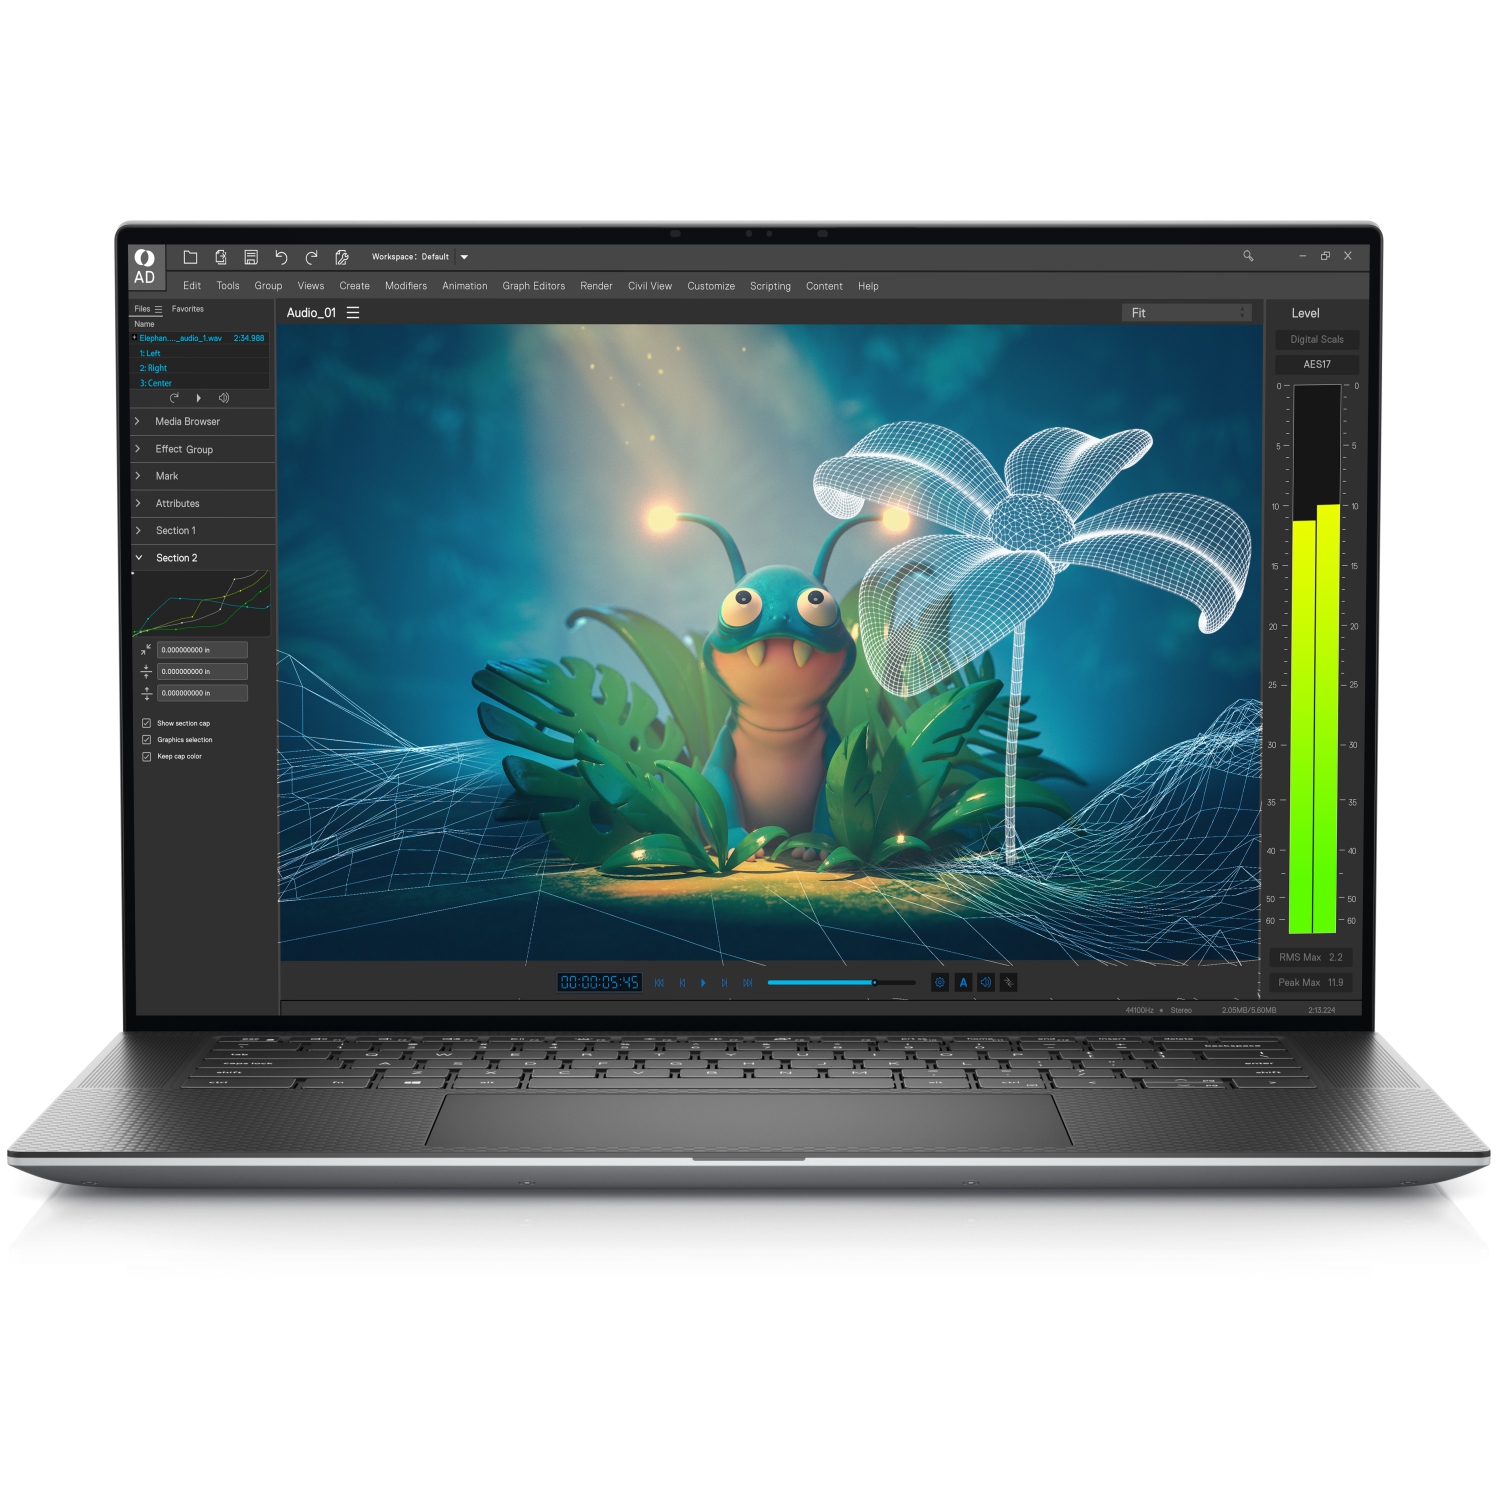 Refurbished (Excellent) – Dell Precision 5000 5570 Workstation Laptop (2022) | 15.6" FHD+ | Core i5 - 256GB SSD - 16GB RAM - RTX A1000 | 12 Cores @ 4.5 GHz - 12th Gen CPU